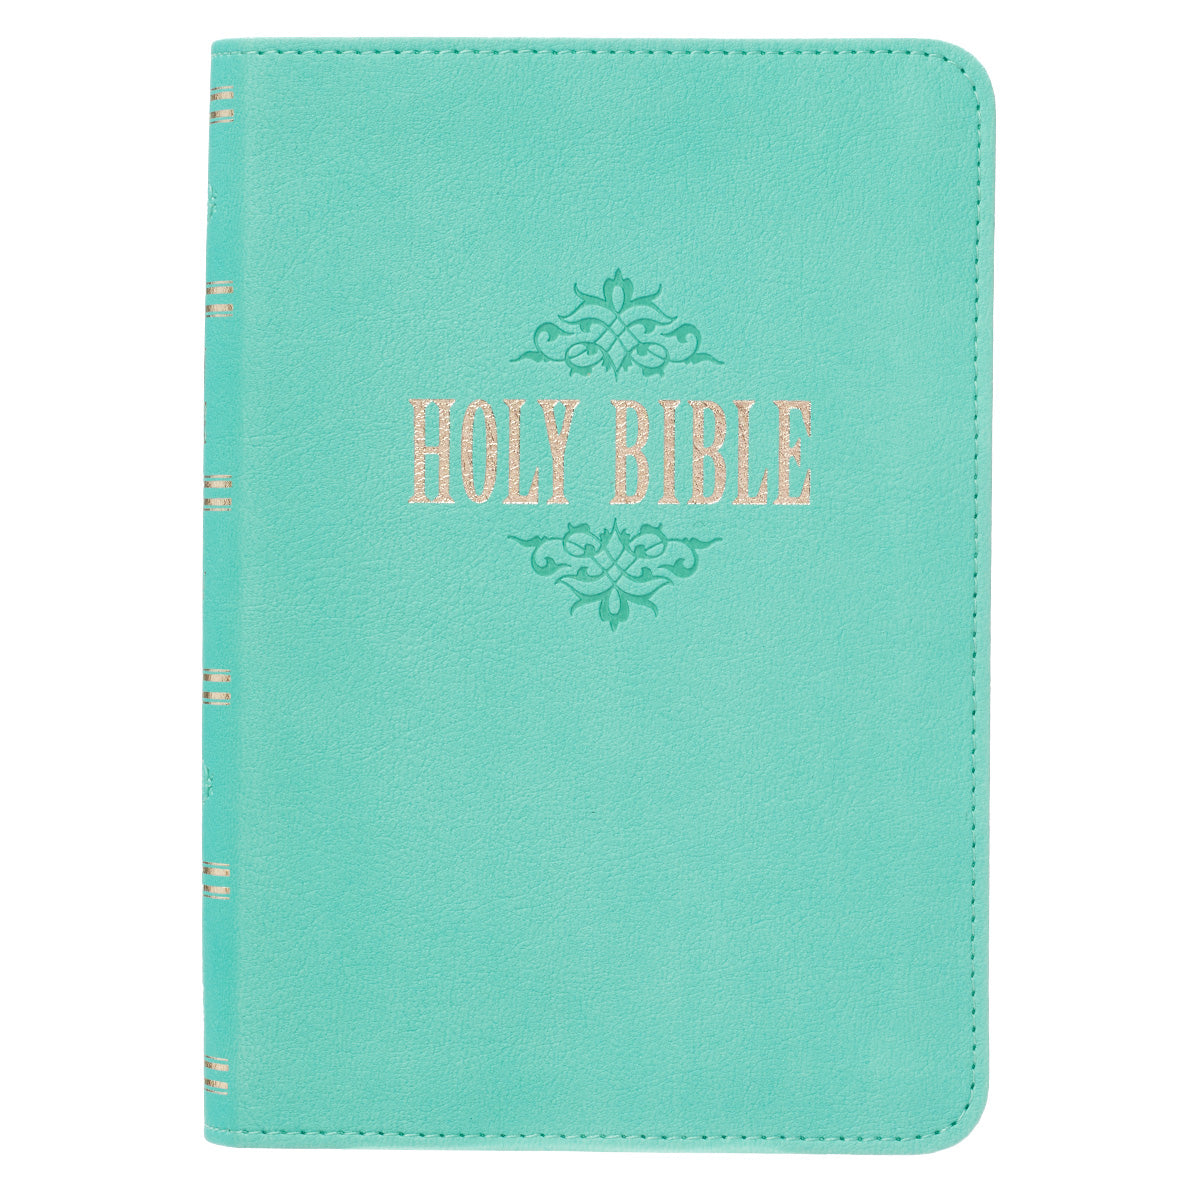 Image of KJV Compact Large Print Lux-Leather Teal other